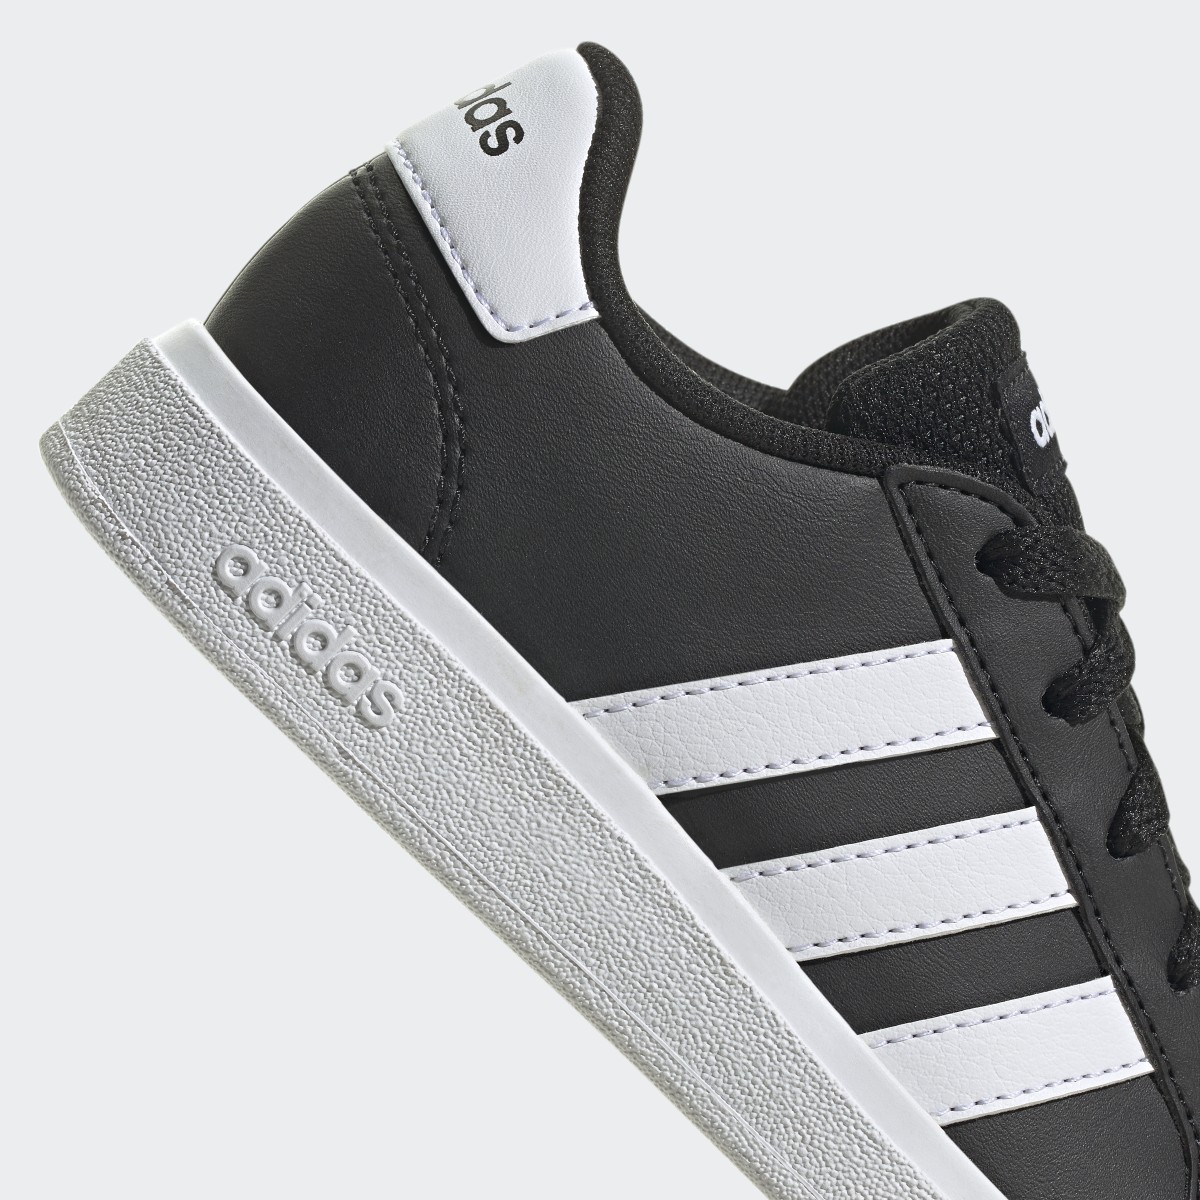 Adidas Grand Court Lace-Up Shoes. 10